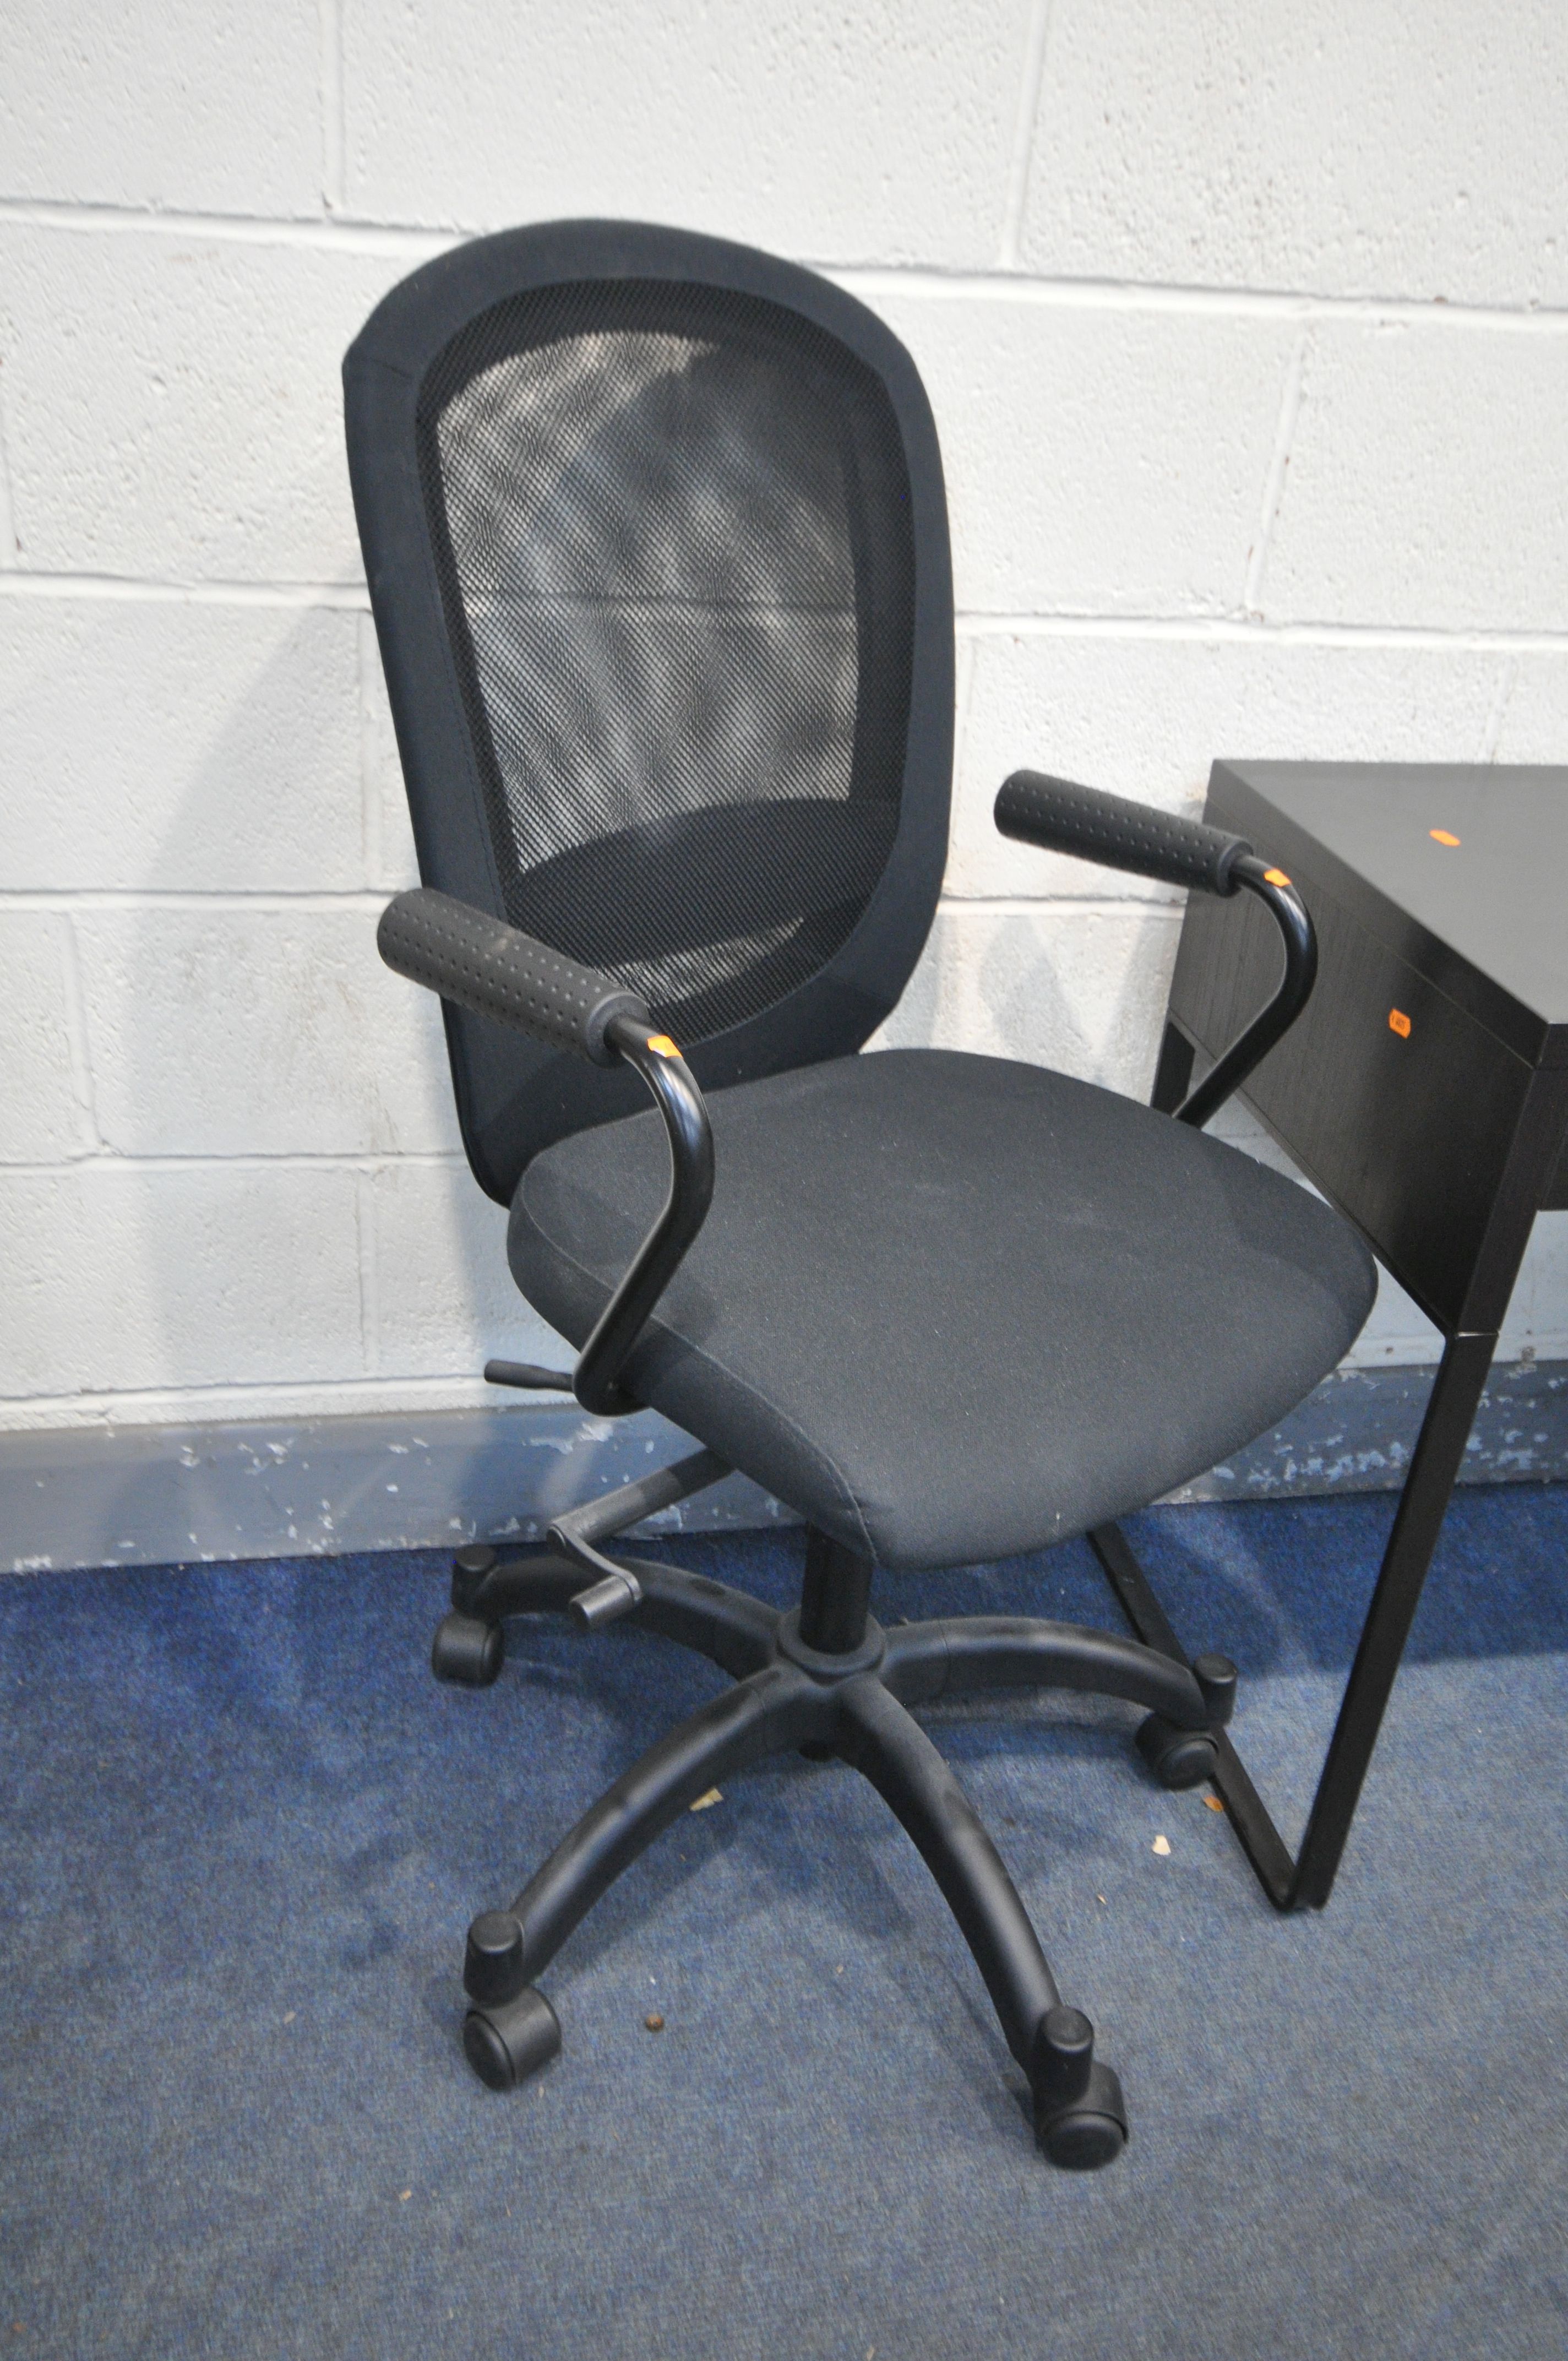 A QUANTITY OF IKEA OFFICE FURNITURE, to include a desk, swivel chair, side desk, rolling cabinet, - Image 4 of 4